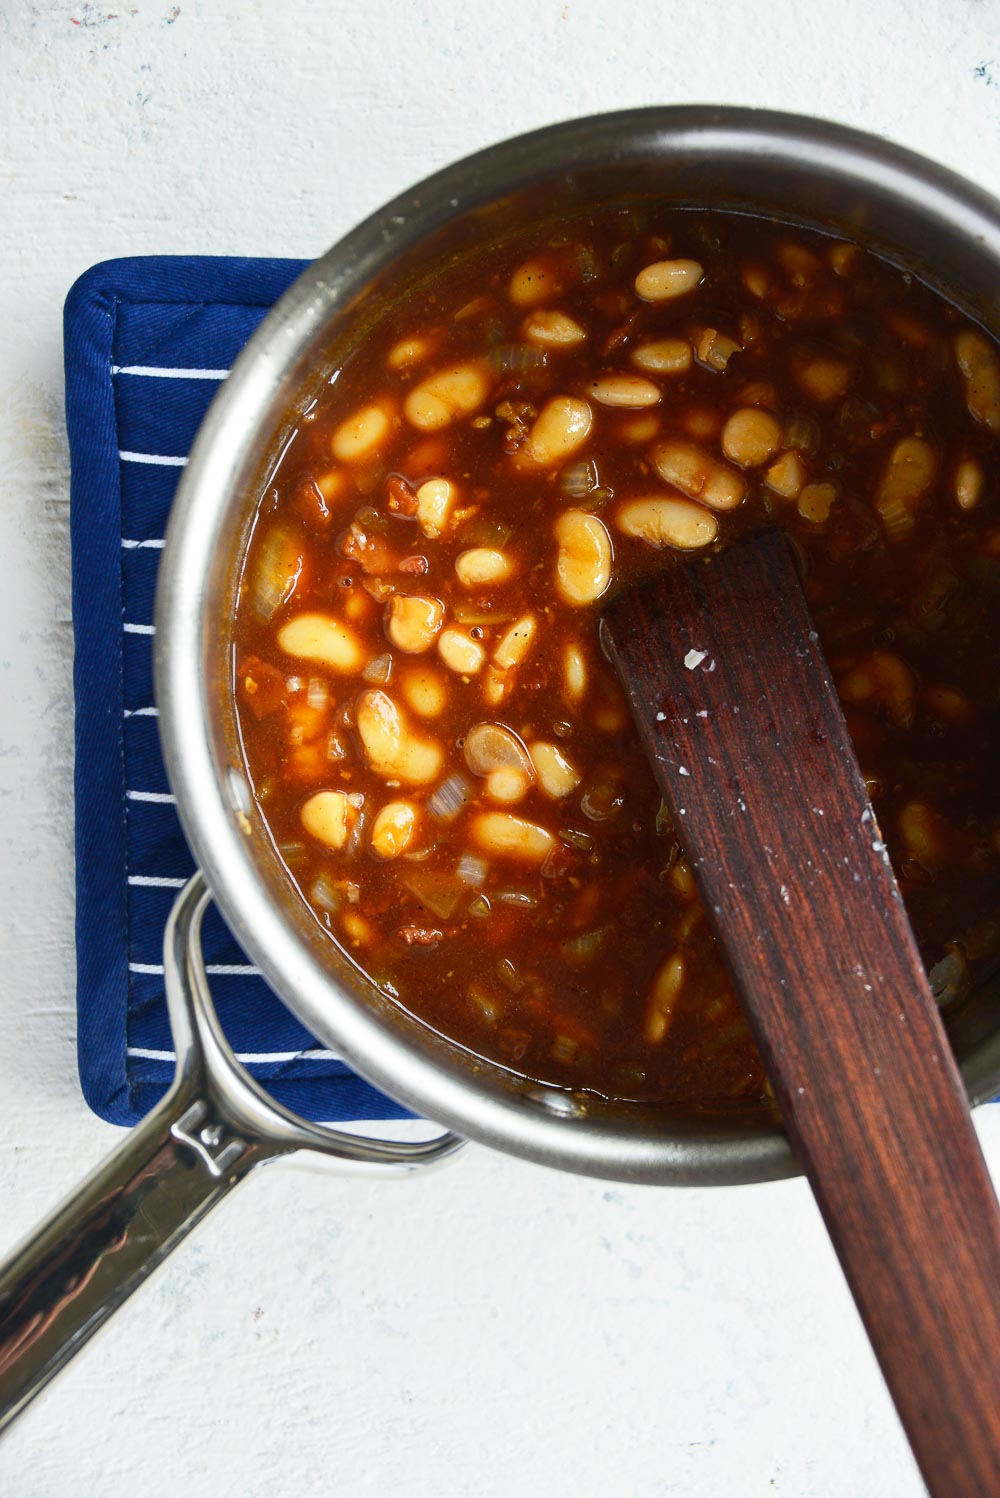 Homemade maple baked beans with bacon is a classic recipe that you can enjoy throughout the year. Sweet and smoky, these baked beans are so tender, easy to make, and can be easily adapted for your meatless Monday lineup. Learn how to cook this flavorful dish in 3 different ways - Dutch oven, slow cooker, Instant Pot. 